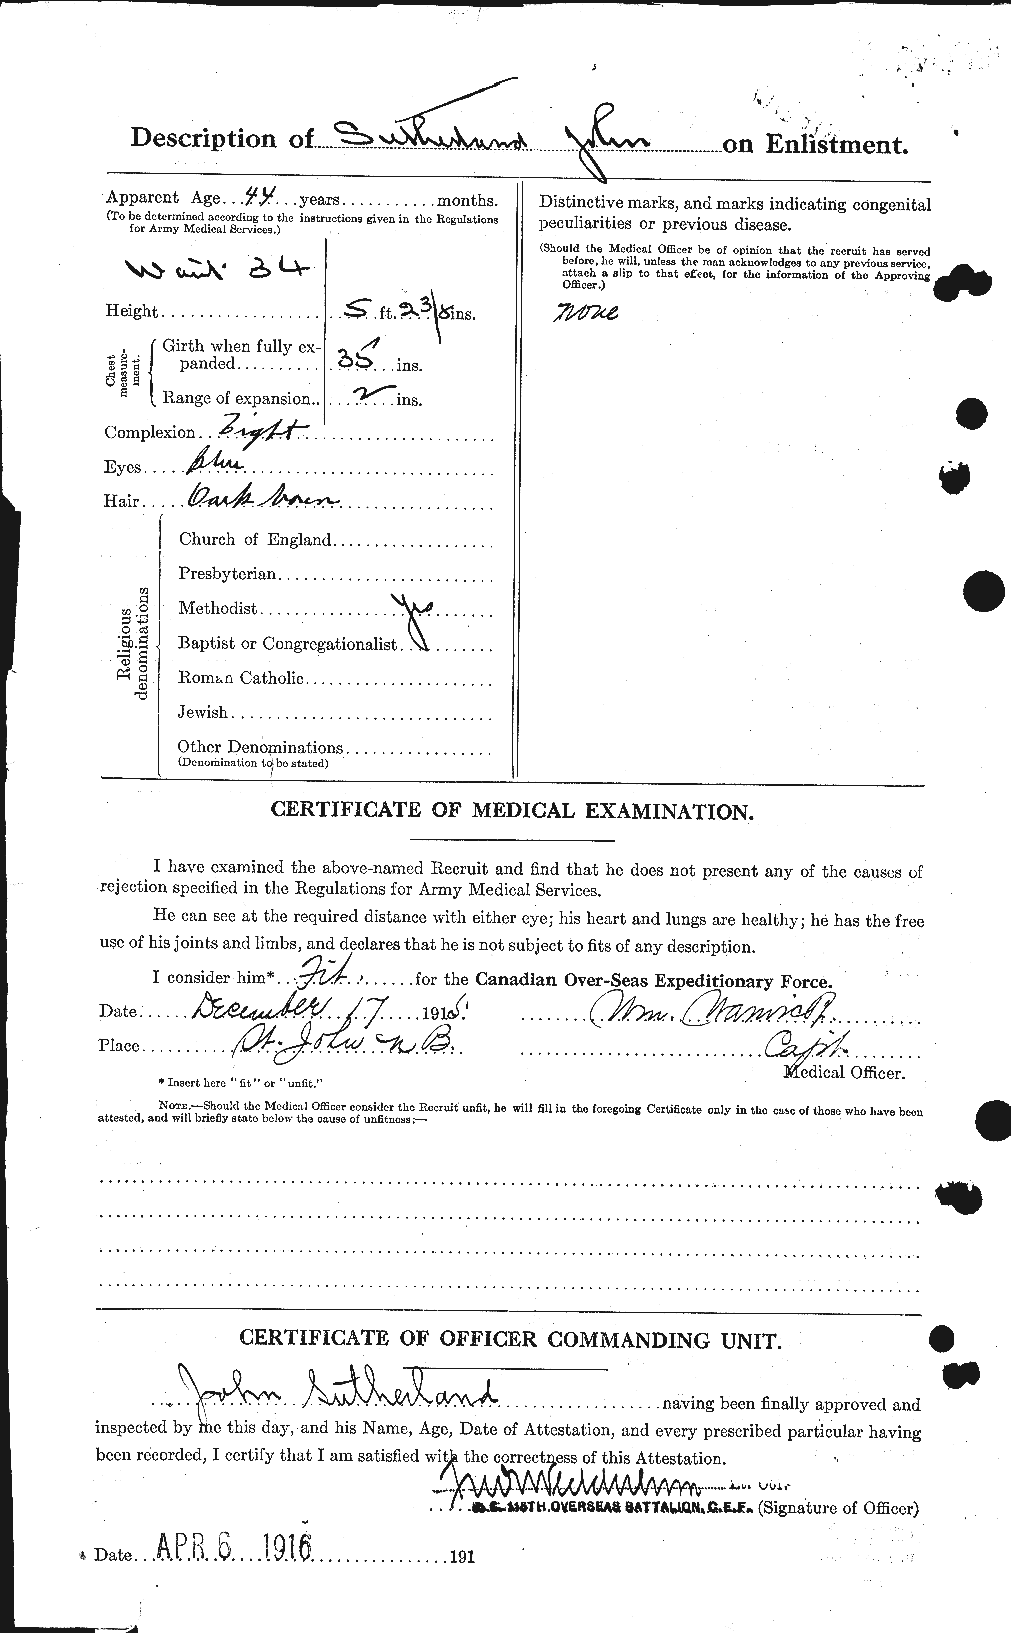 Personnel Records of the First World War - CEF 124722b